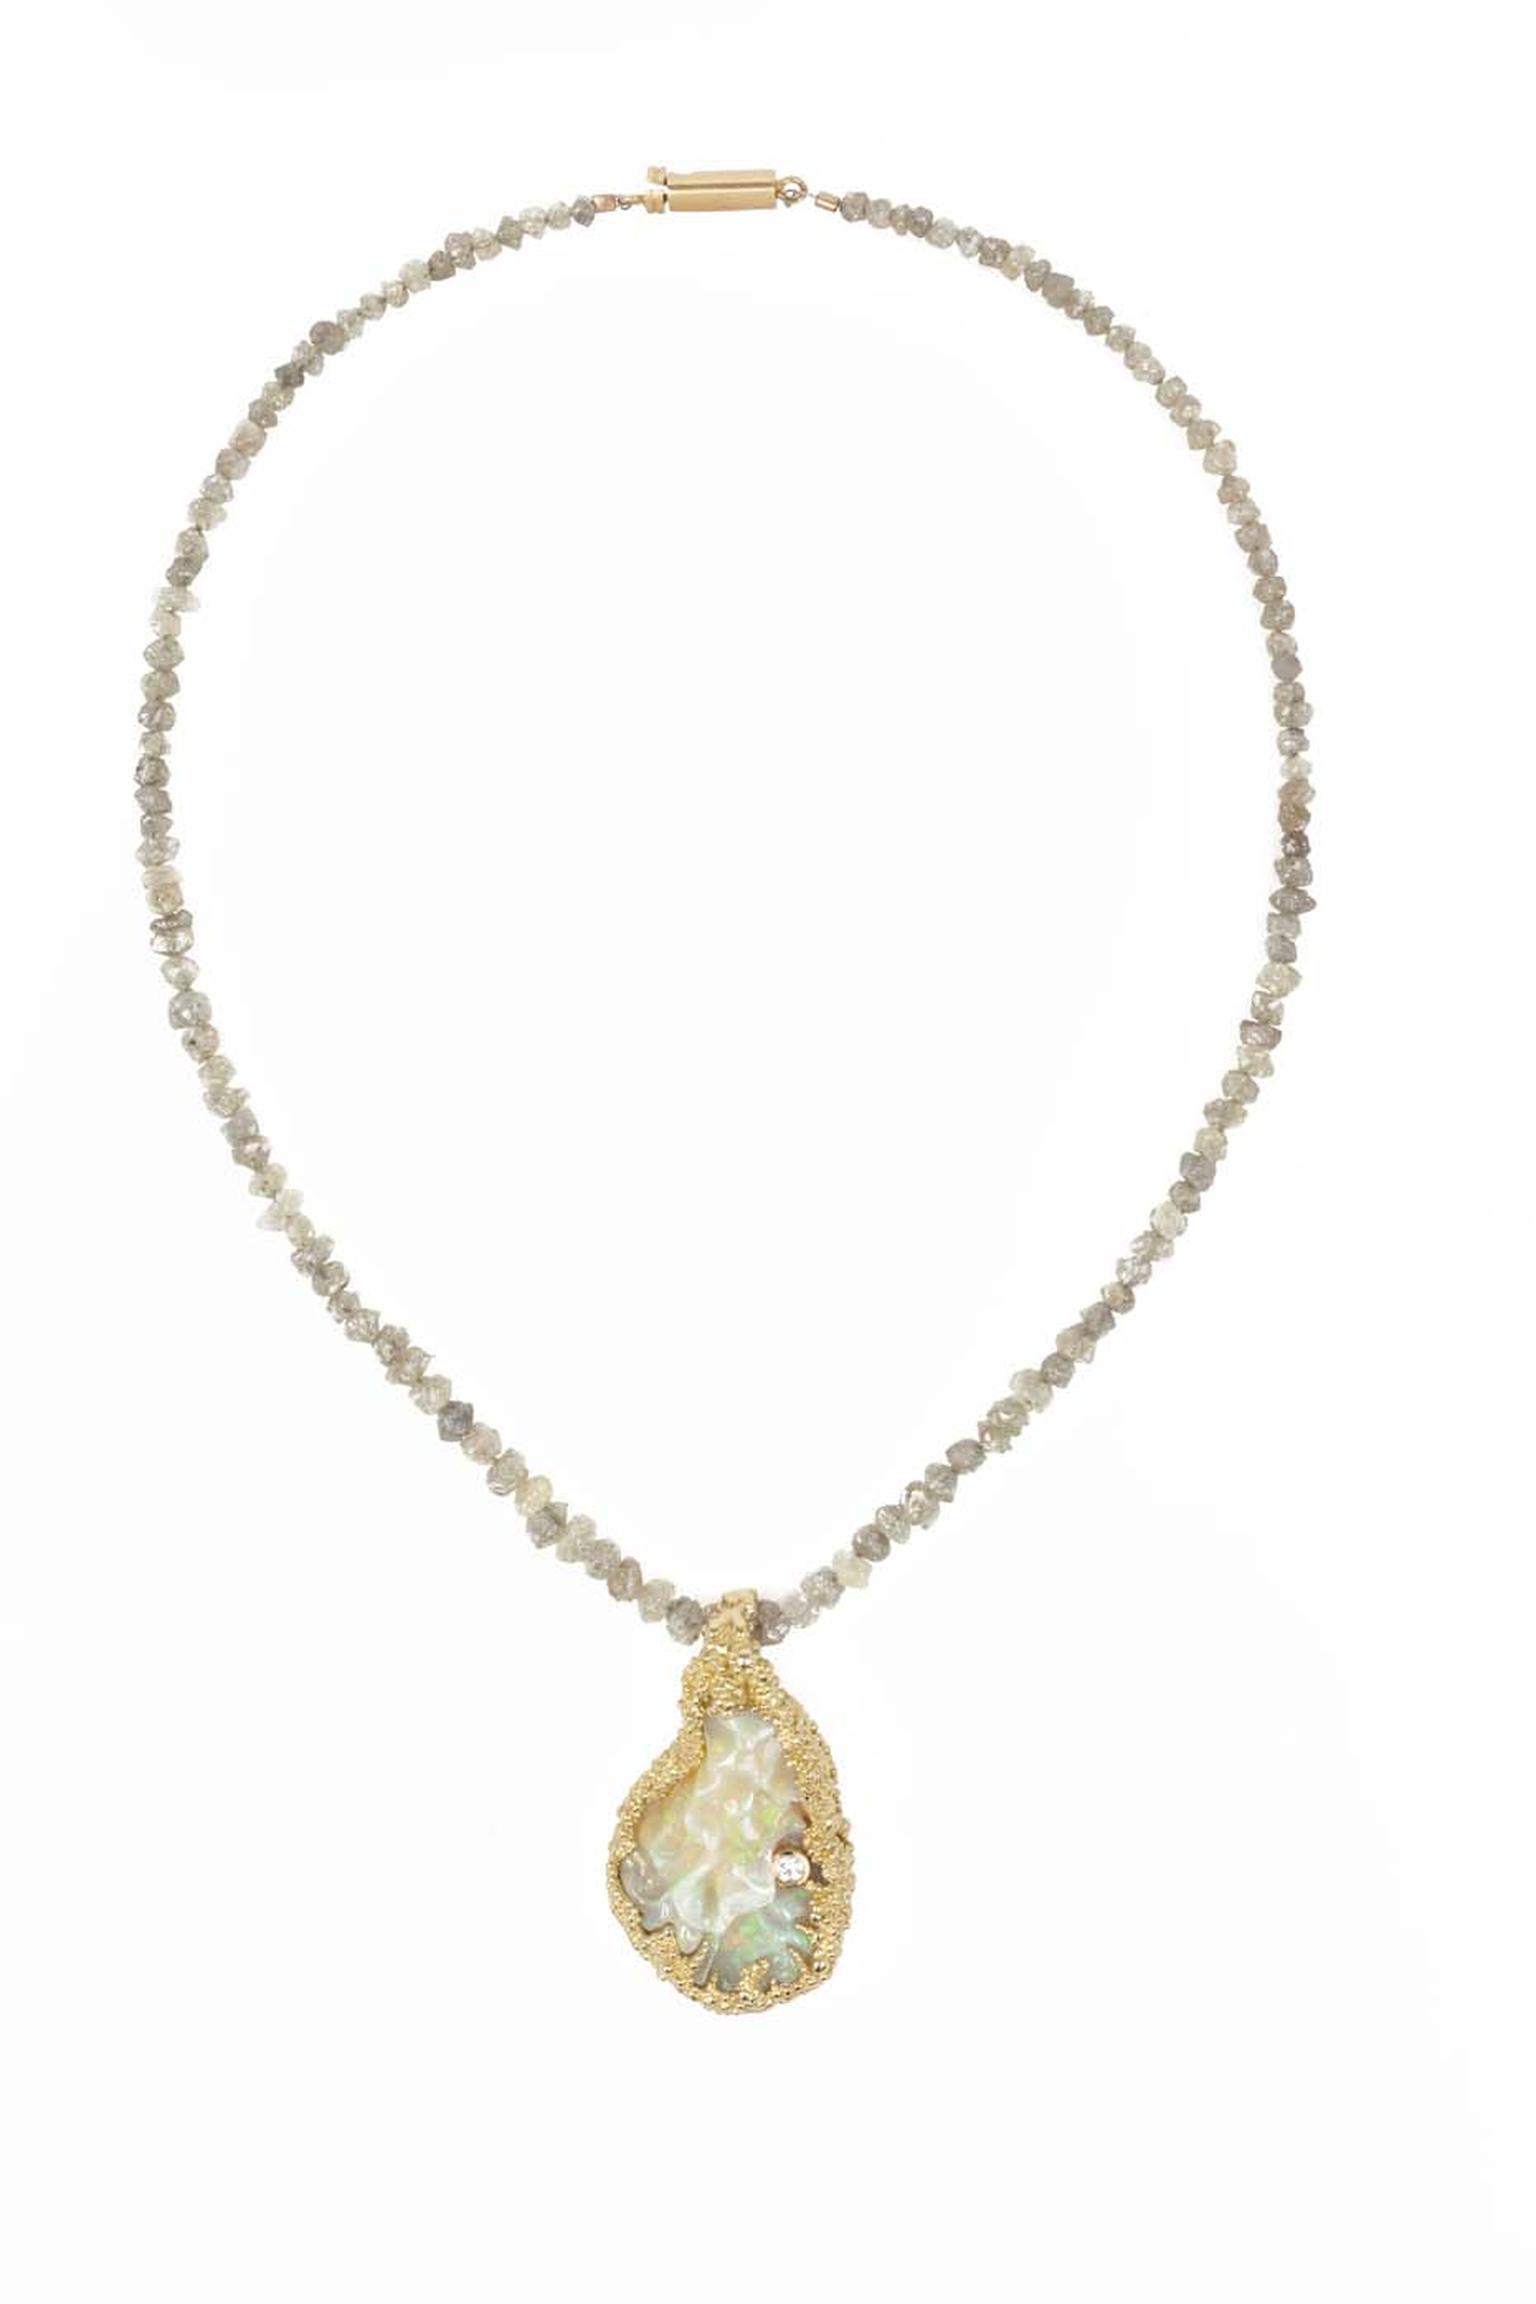 Ornella Iannuzzi Blue Nile Falls necklace featuring a hand-carved Wello opal (20ct) set in gold with a single brilliant-cut diamond.